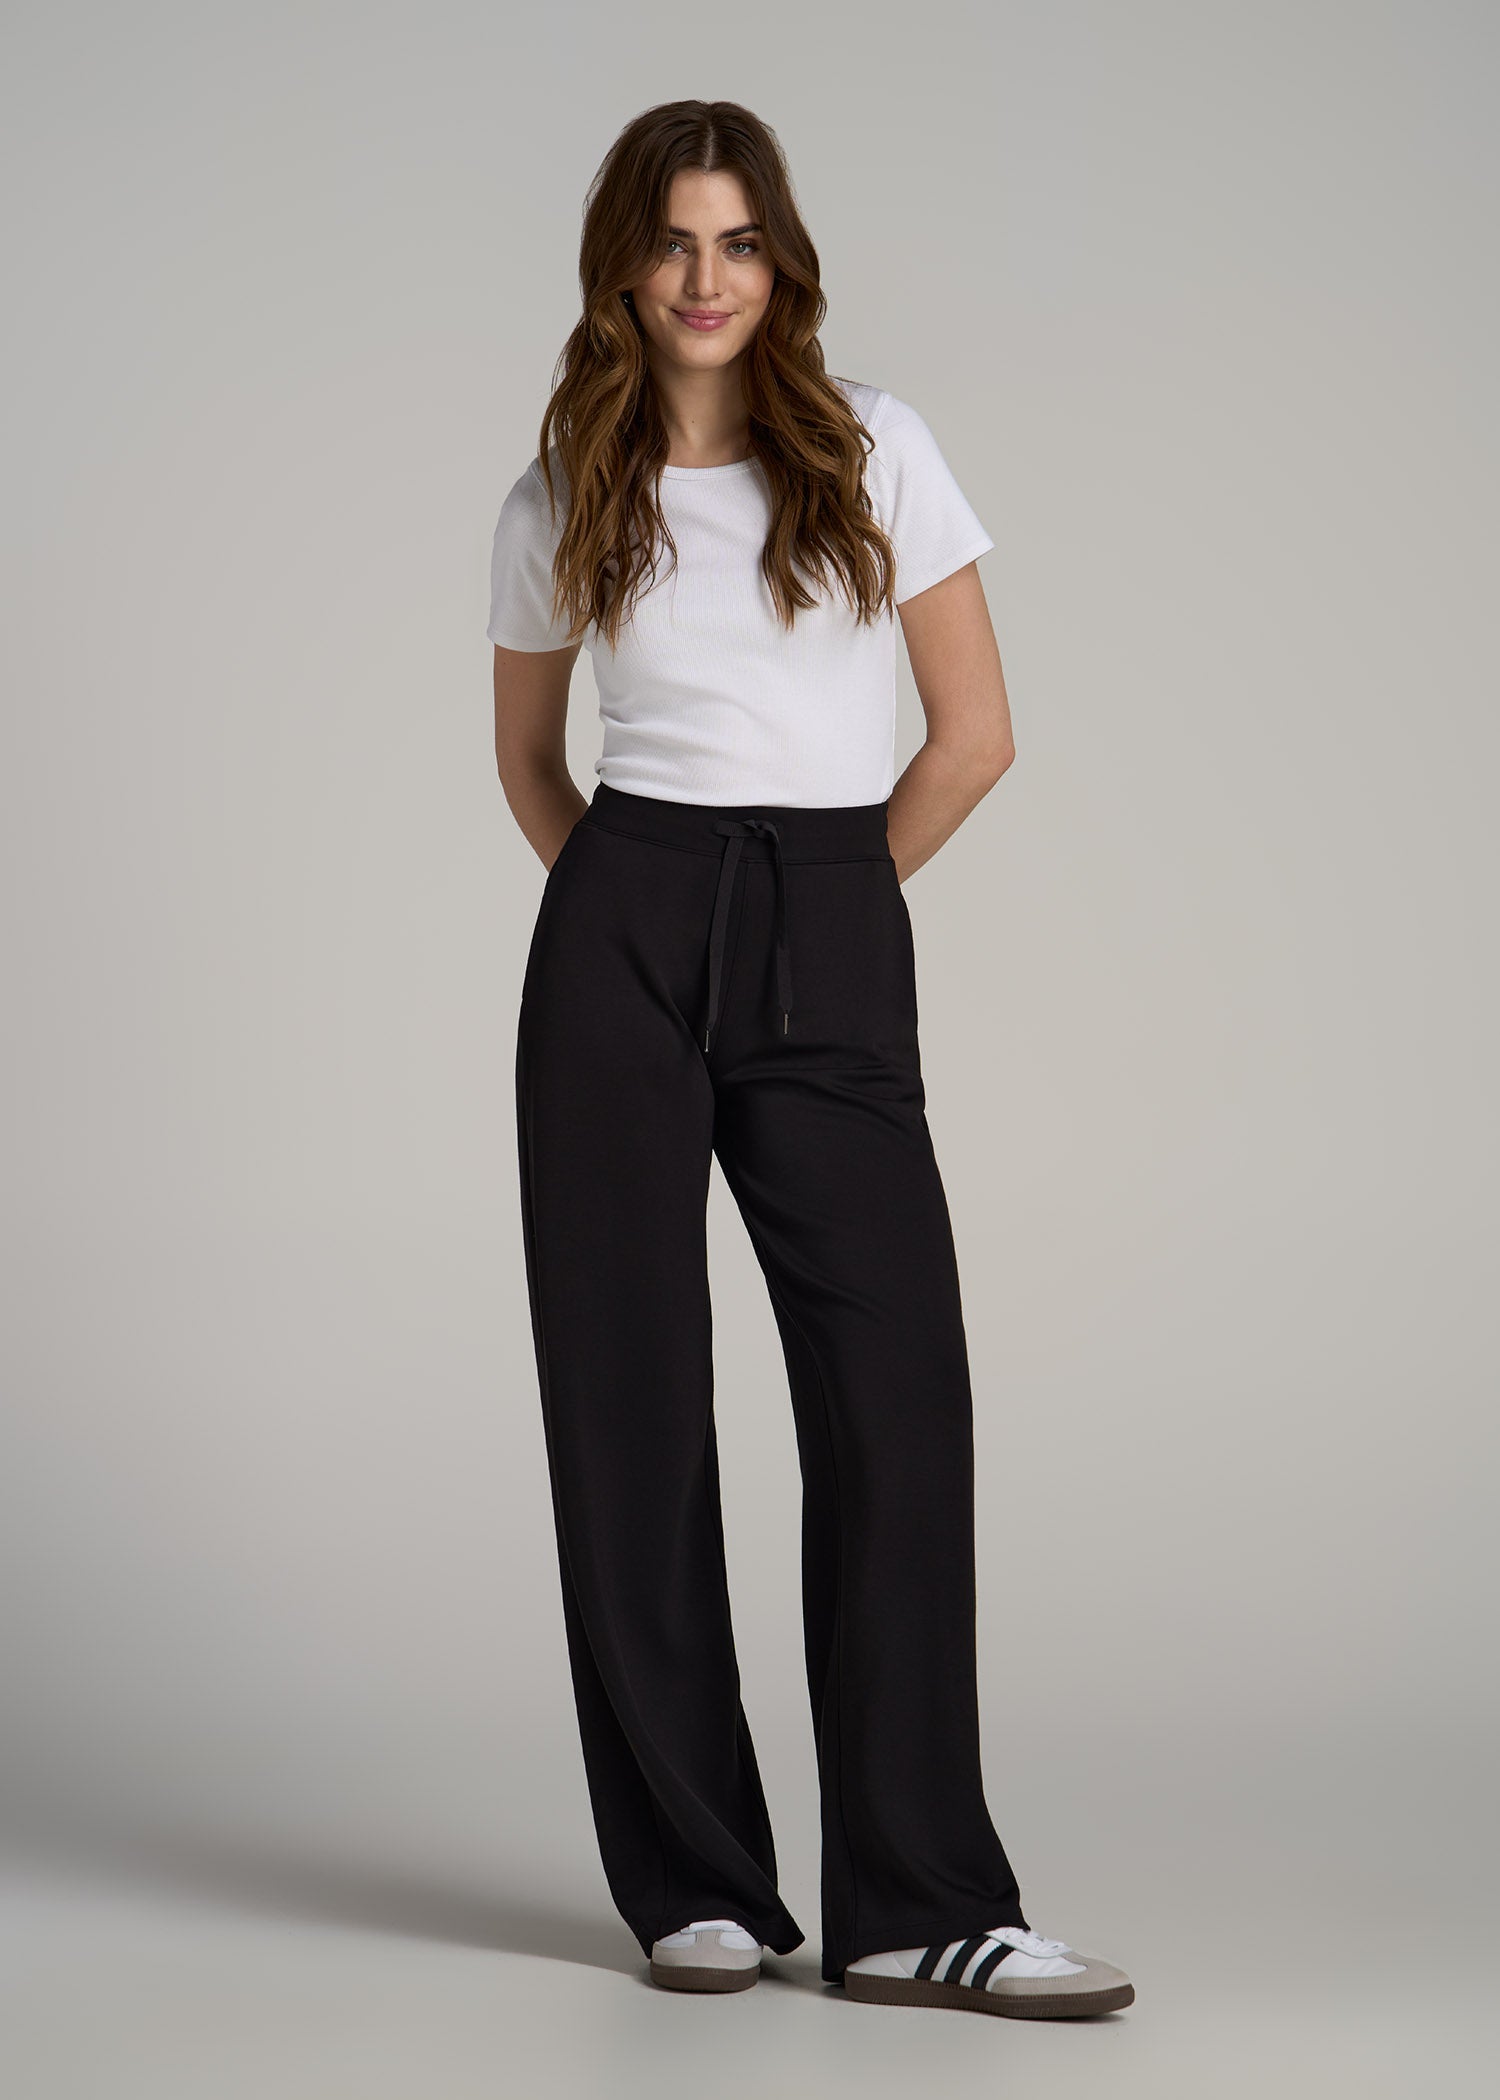 Tall Pants for Women